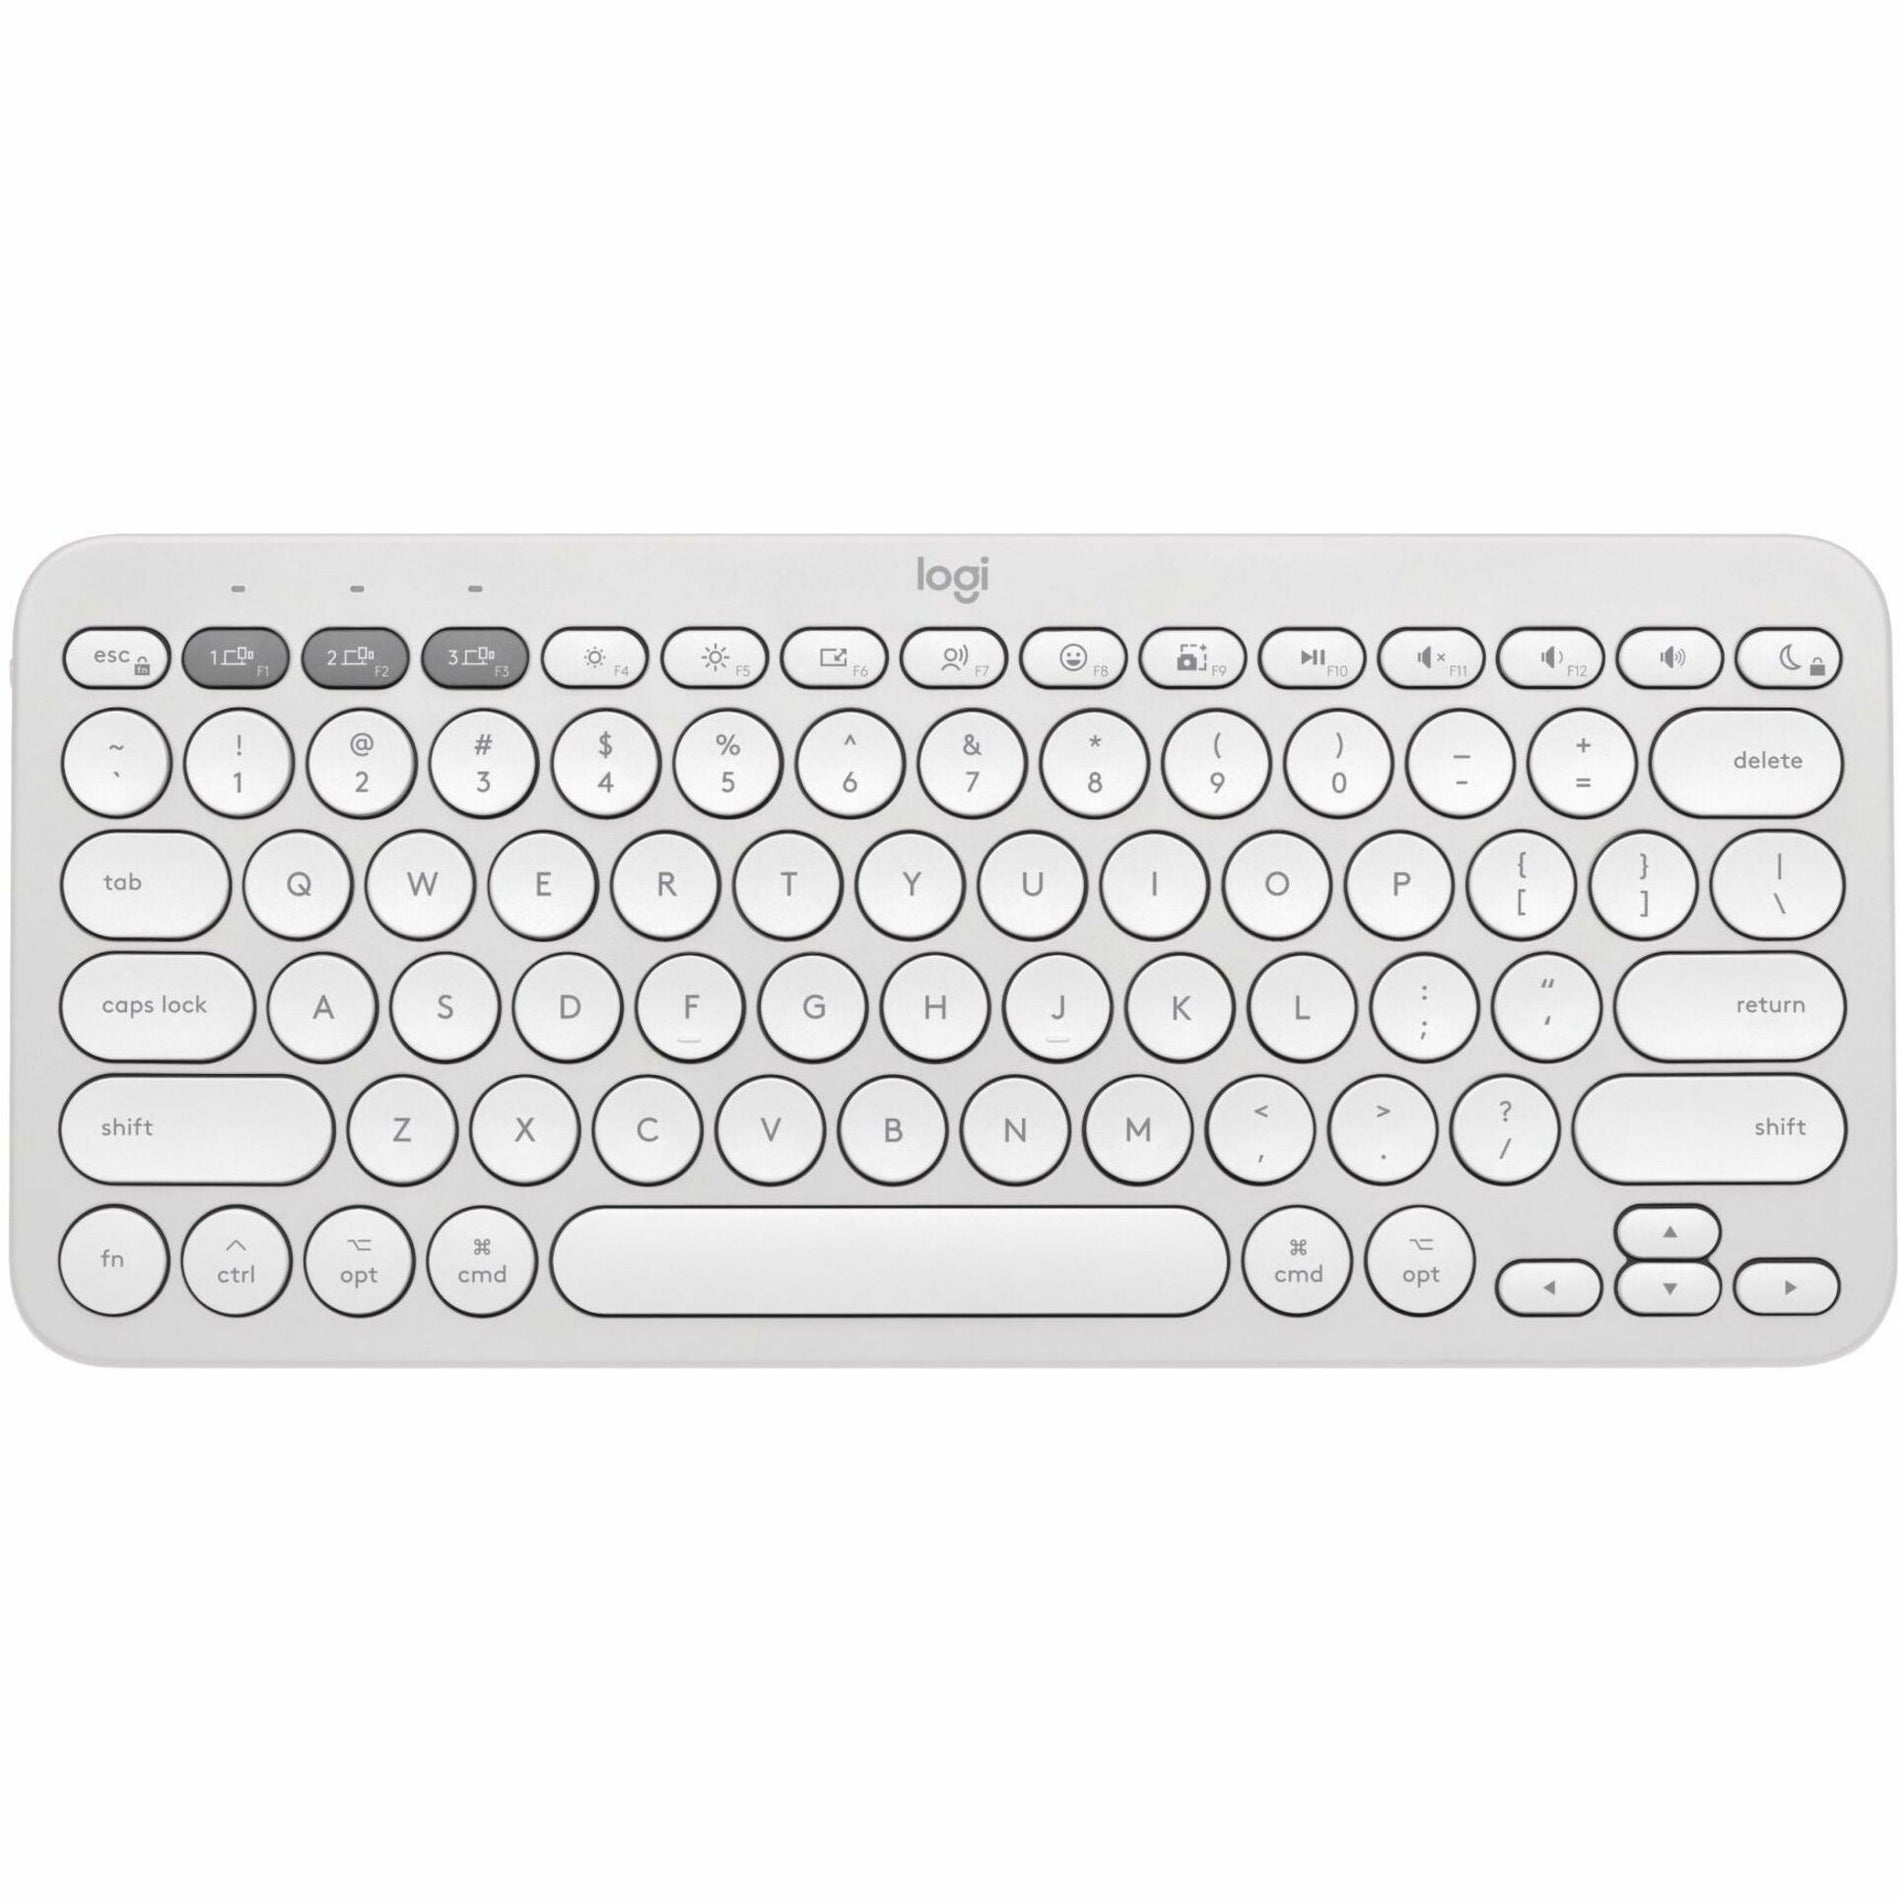 Logitech 920-012201 Pebble 2 Combo for Mac Wireless Keyboard and Mouse, Tonal White, Bluetooth, Slim, Quiet Keys